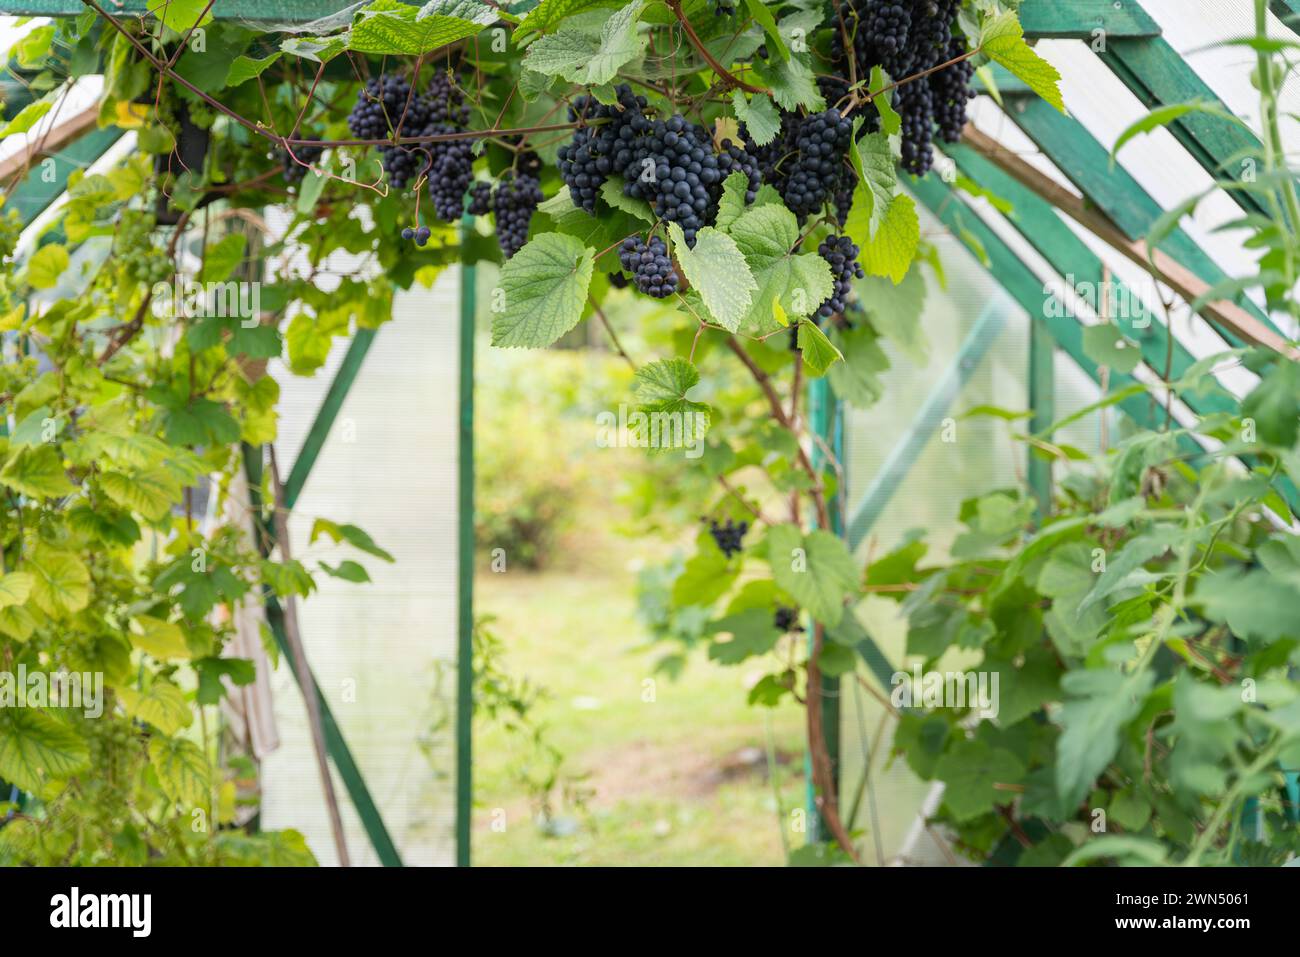 Ripe dark blue grapes. Dark blue grapes in a greenhouse background. Grapevine in greenhouse. Leaves and dark blue bunches of grapes. Stock Photo